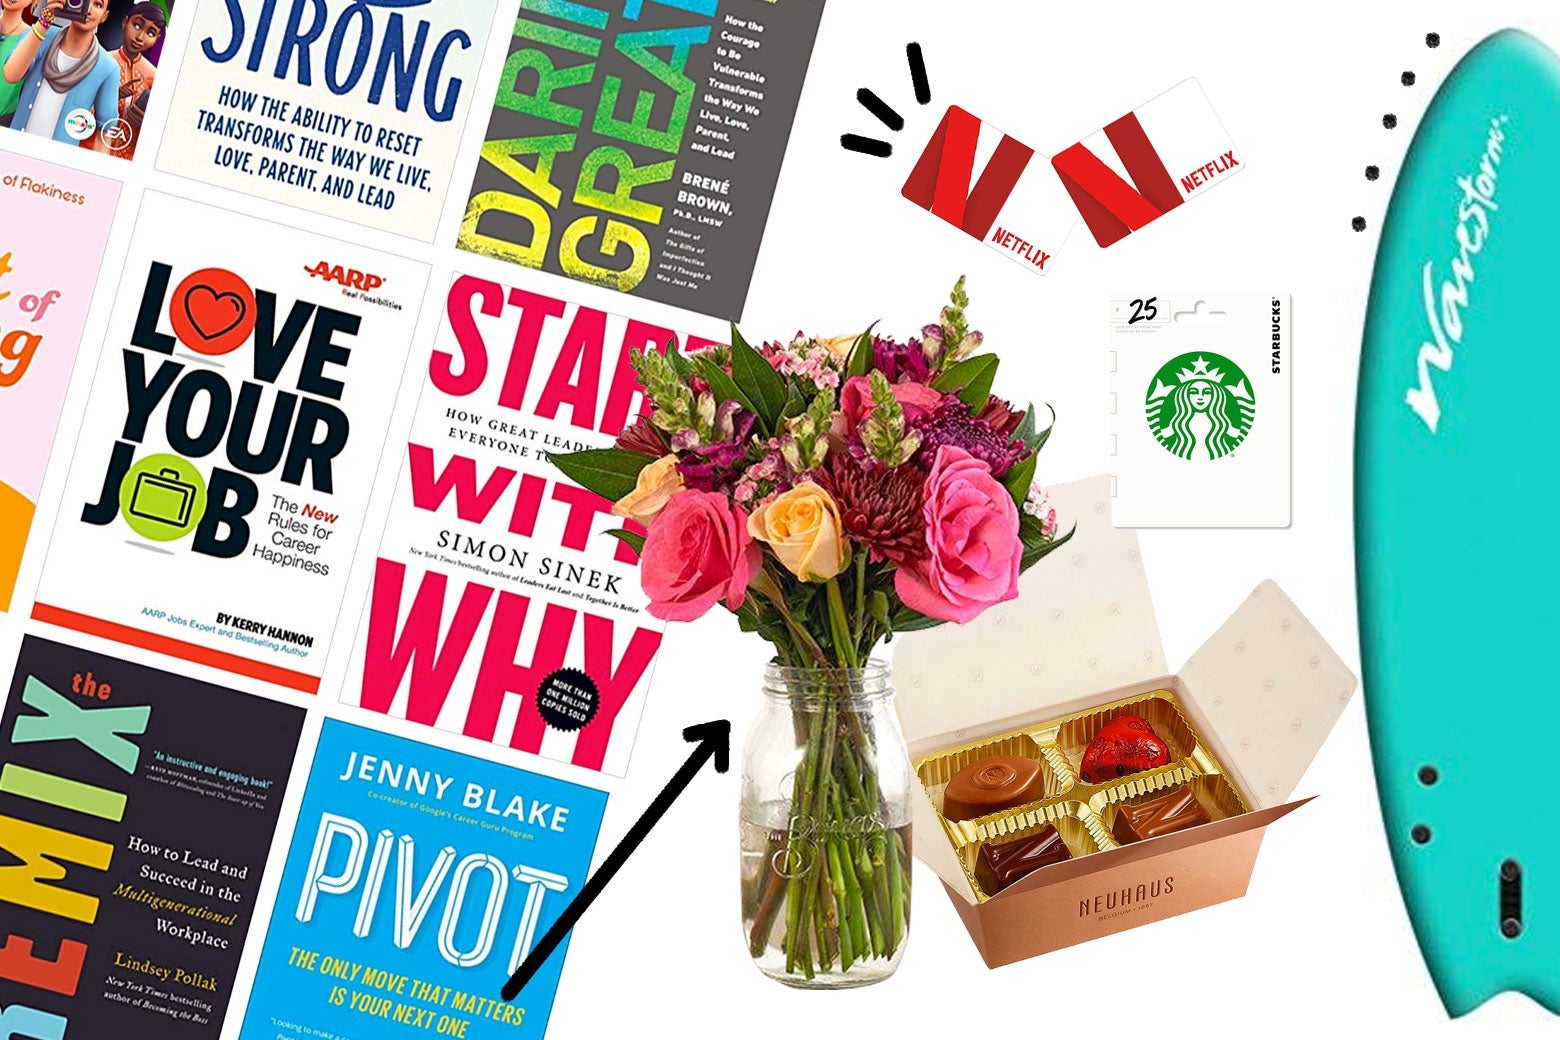 An arrangement of book, flowers, chocolates, and Starbucks and Netflix gift cards, along with a surfboard